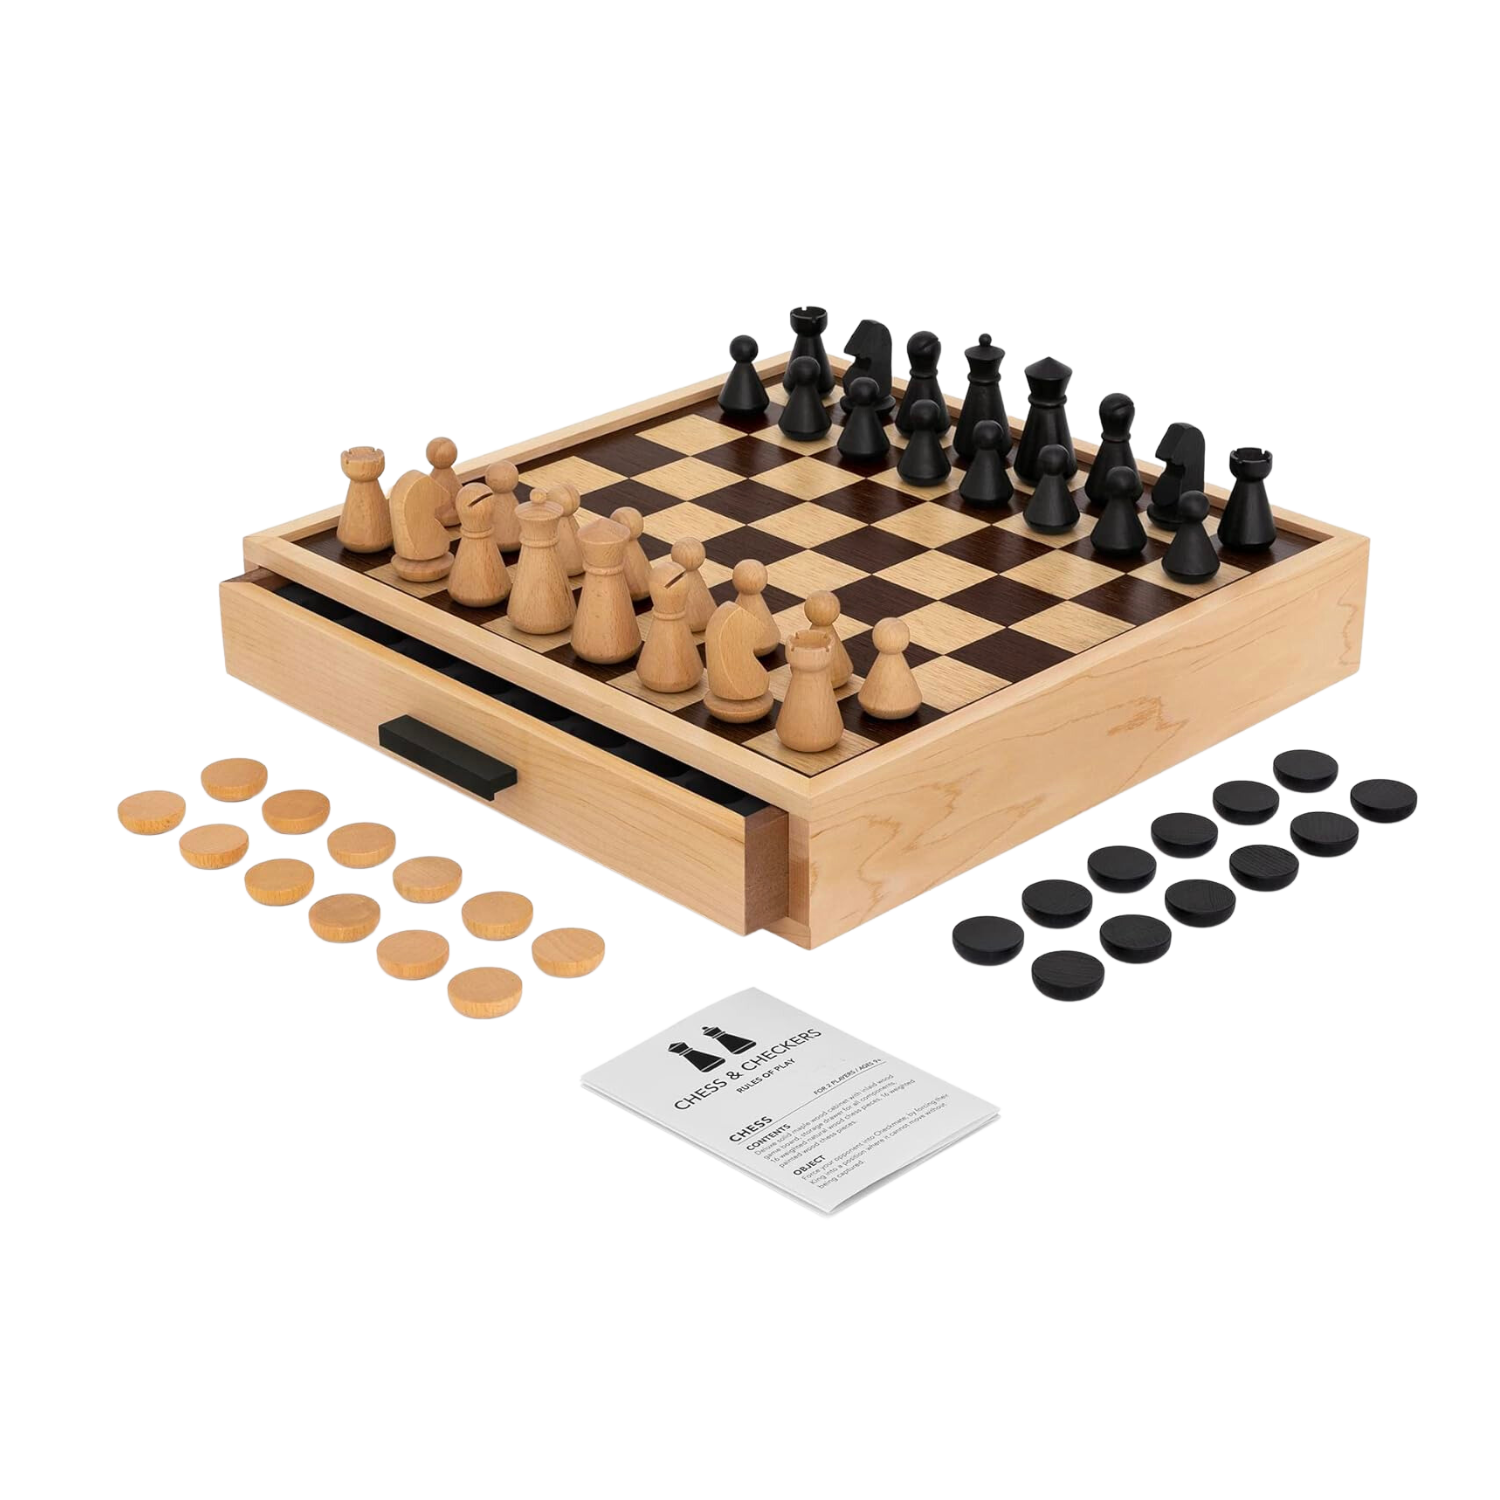 Luxury wooden Chess and Checkers set